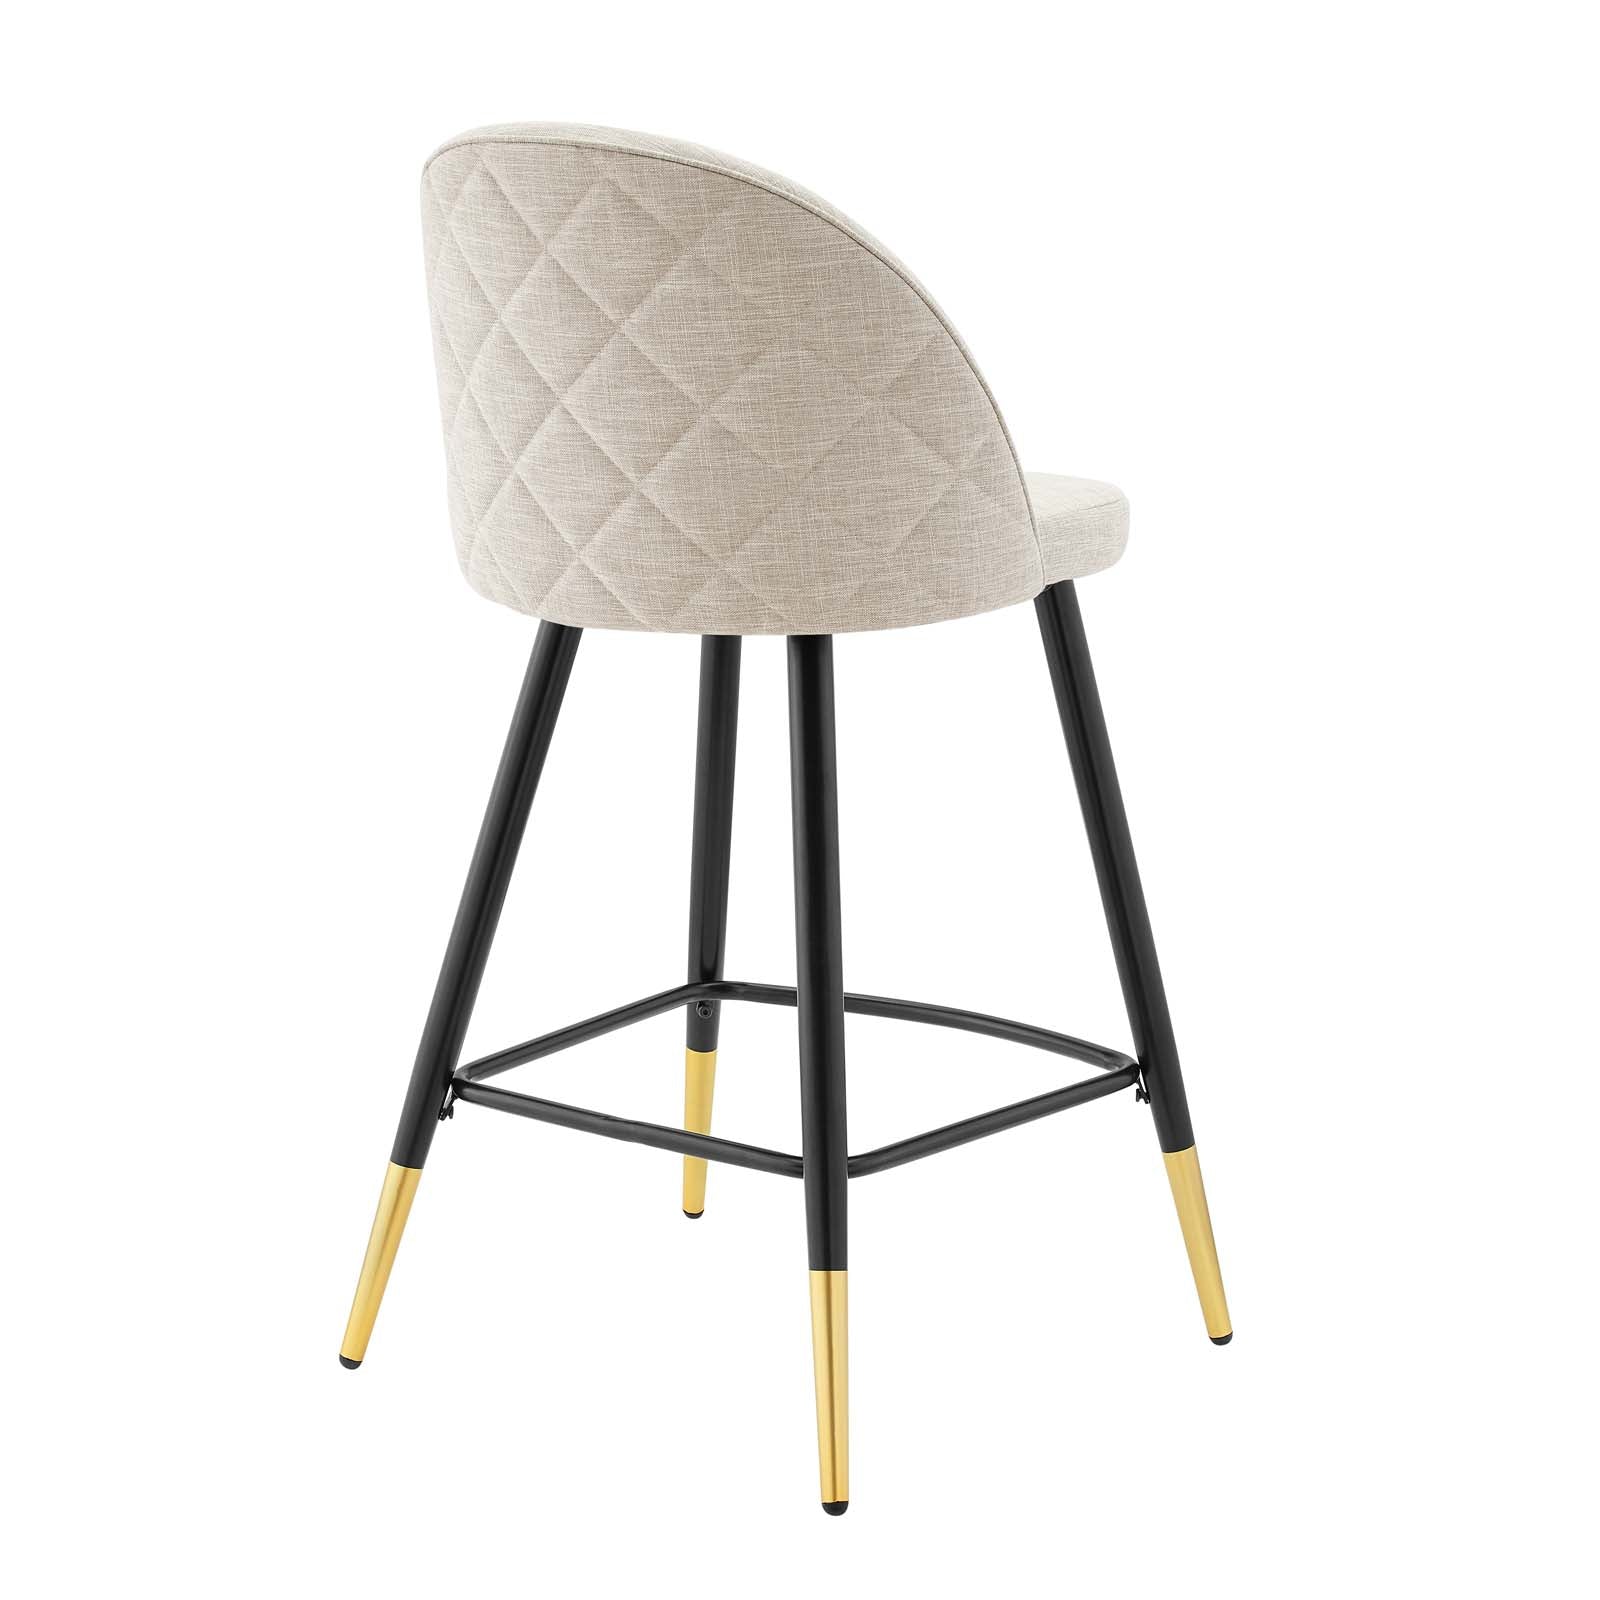 Modway Barstools - Cordial Fabric Counter Stools - ( Set of 2 ) Beige